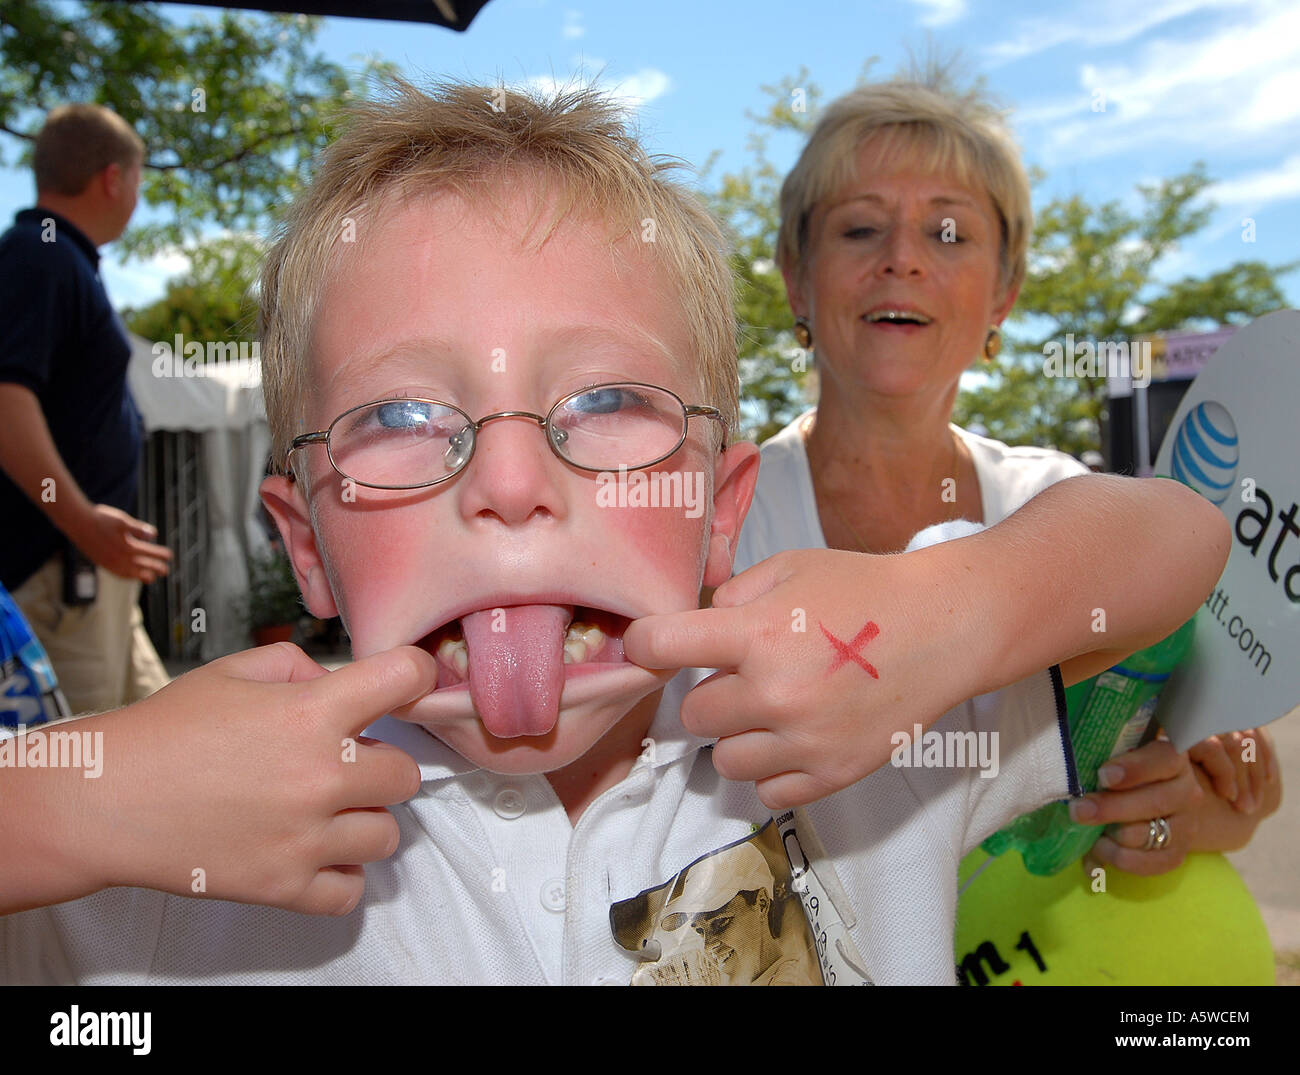 Cute kid with blonde hair making funny face sticking his tongue out Stock Photo